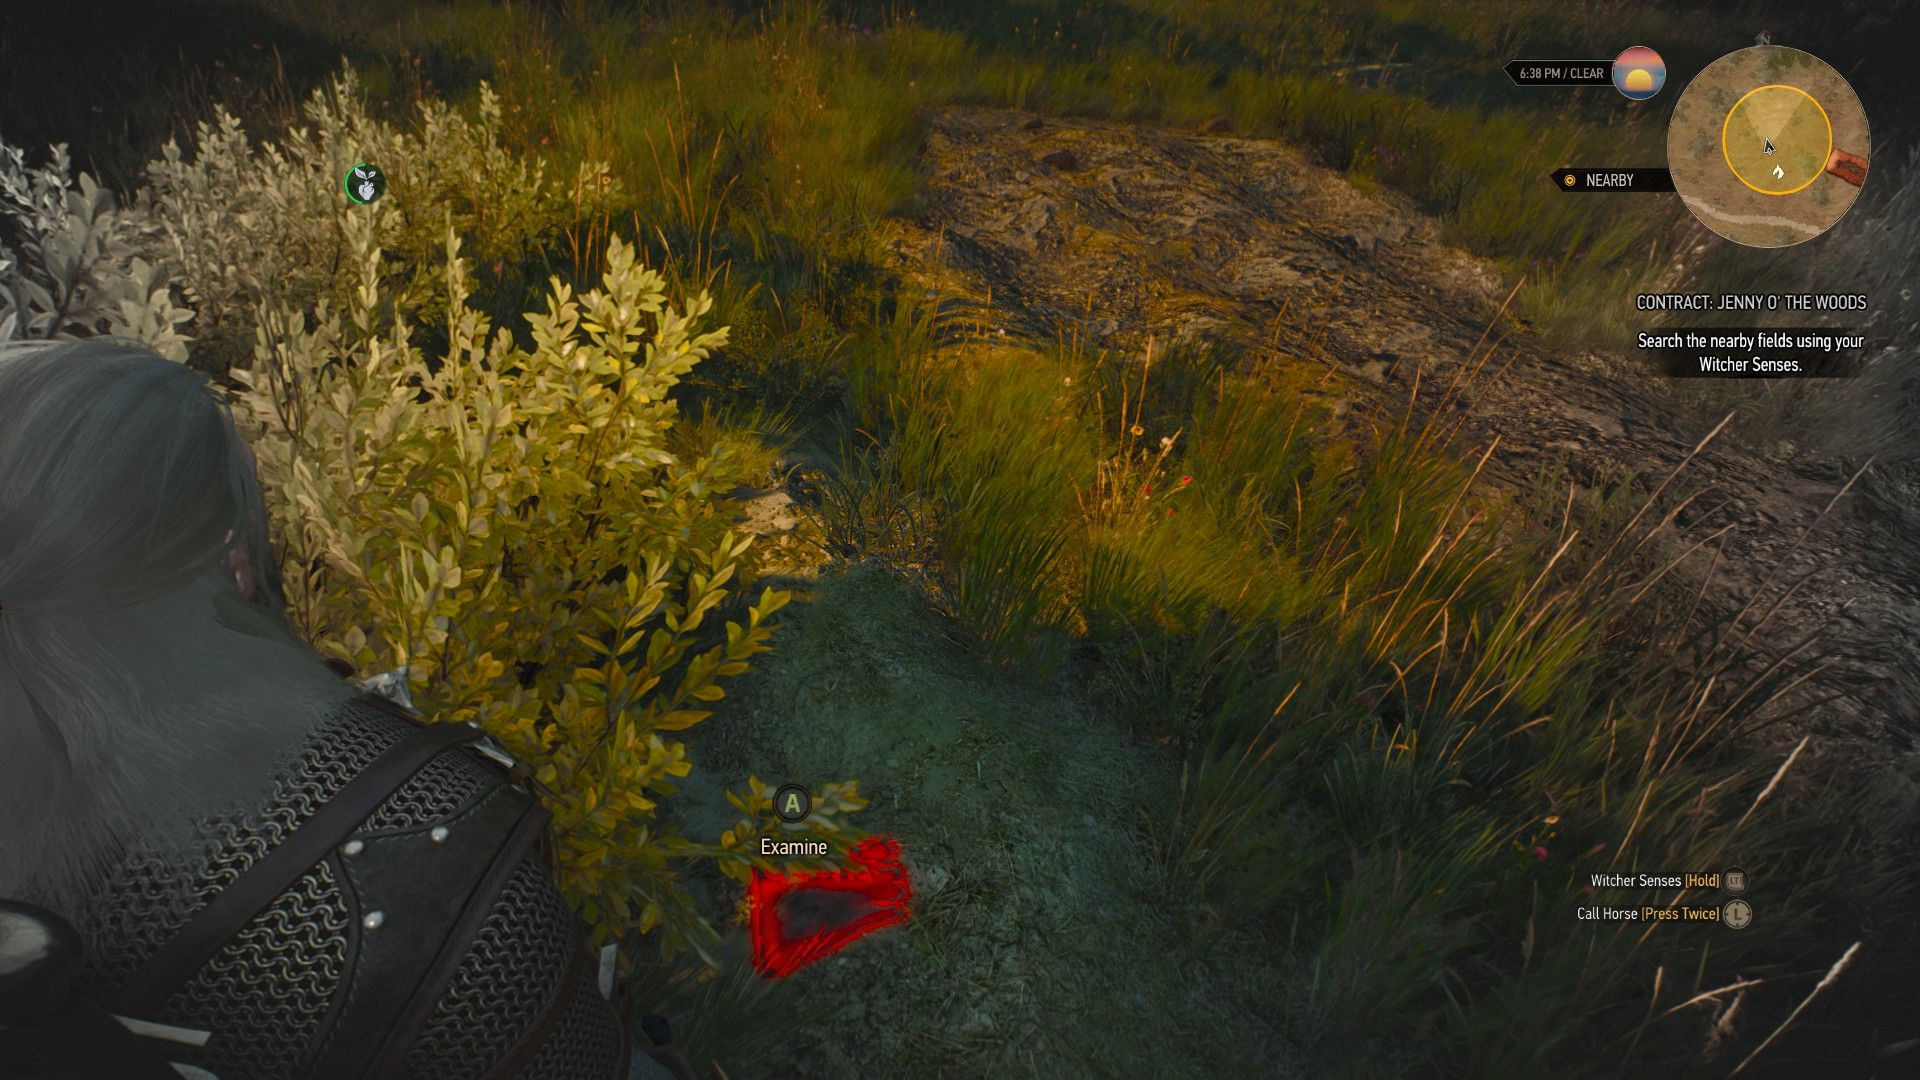 A screenshot from The Witcher 3 of the player using Witcher Senses to look at a clue.